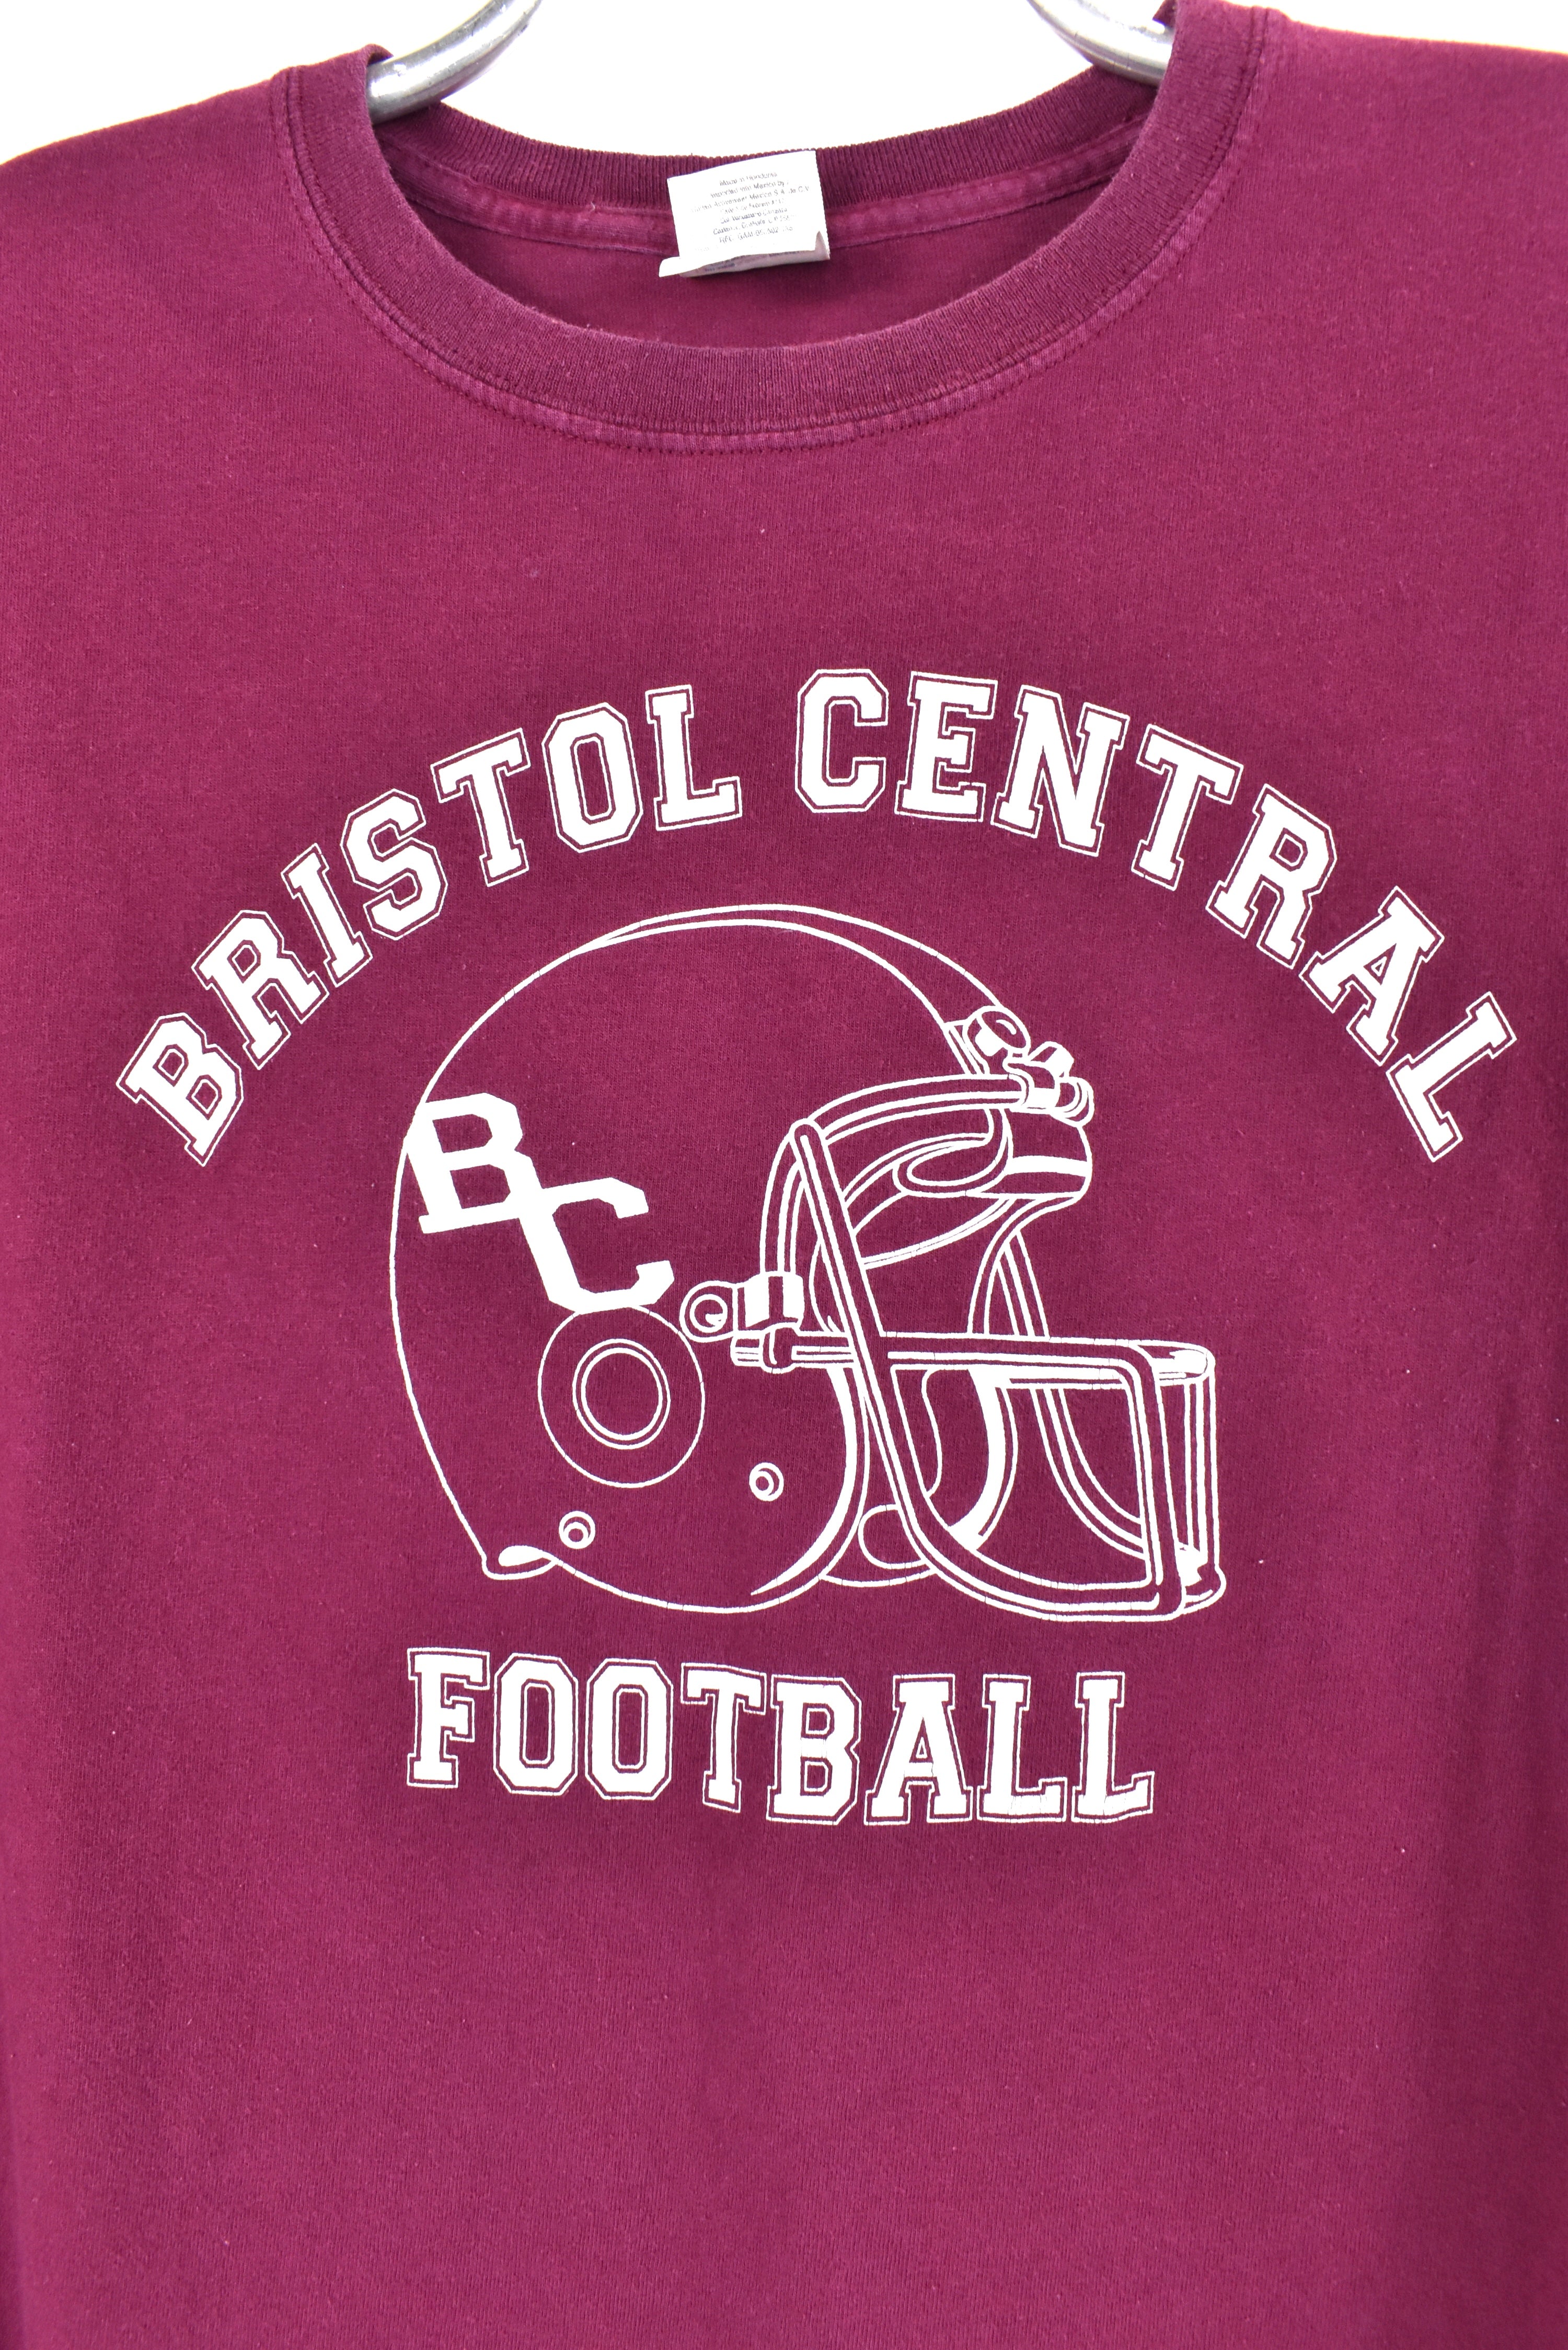 Vintage Bristol Central shirt, college football graphic tee - AU Large COLLEGE